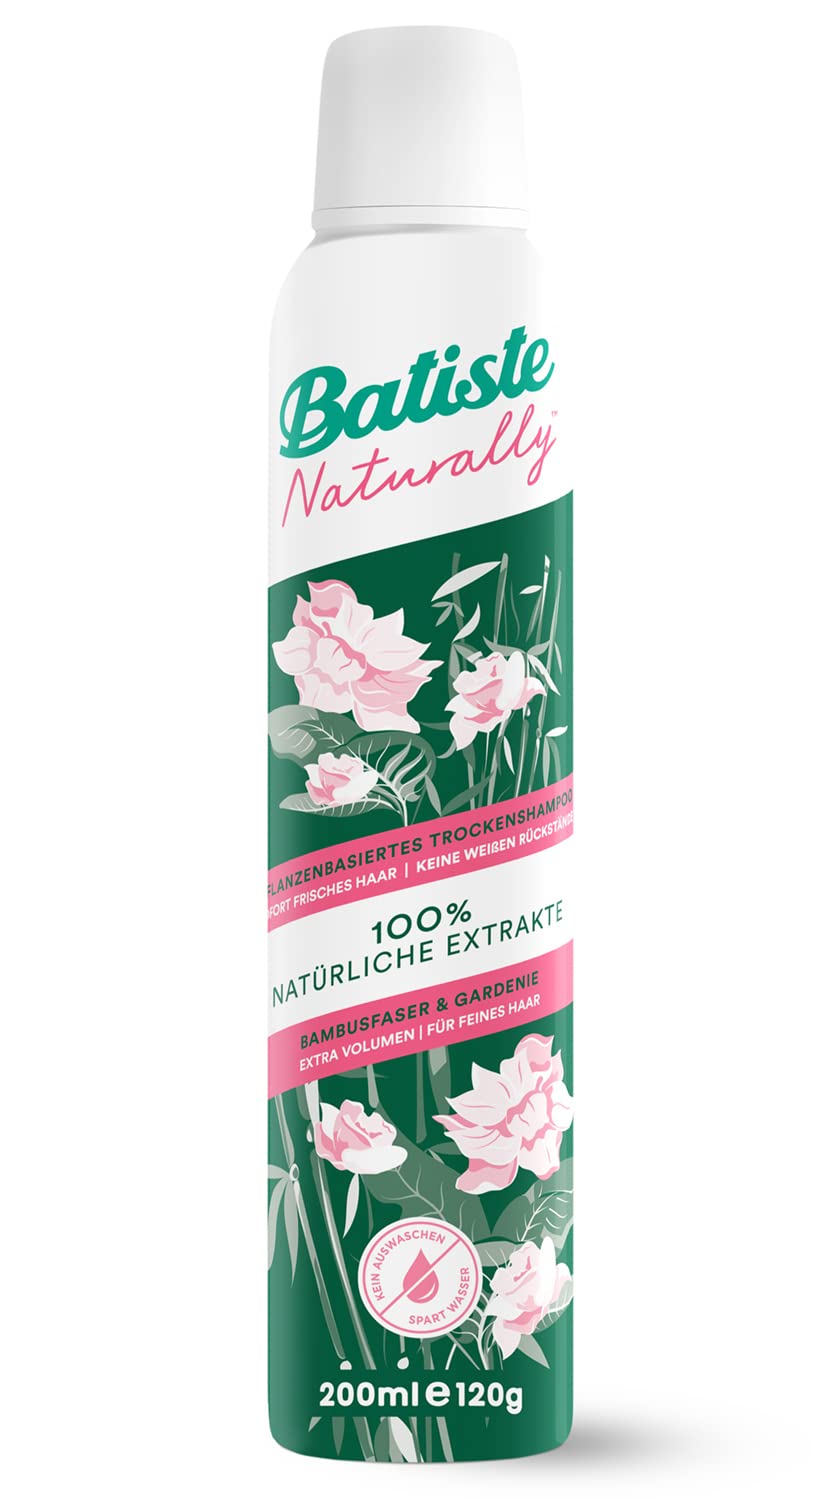 Batiste Dry Shampoo Naturally Bamboo Fibre & Gardenia 200 ml, Dry Shampoo for Refreshing and Styling Fine Hair, No Rinse, Hair Styling Vegan, with 100% Natural Extracts, ‎clear